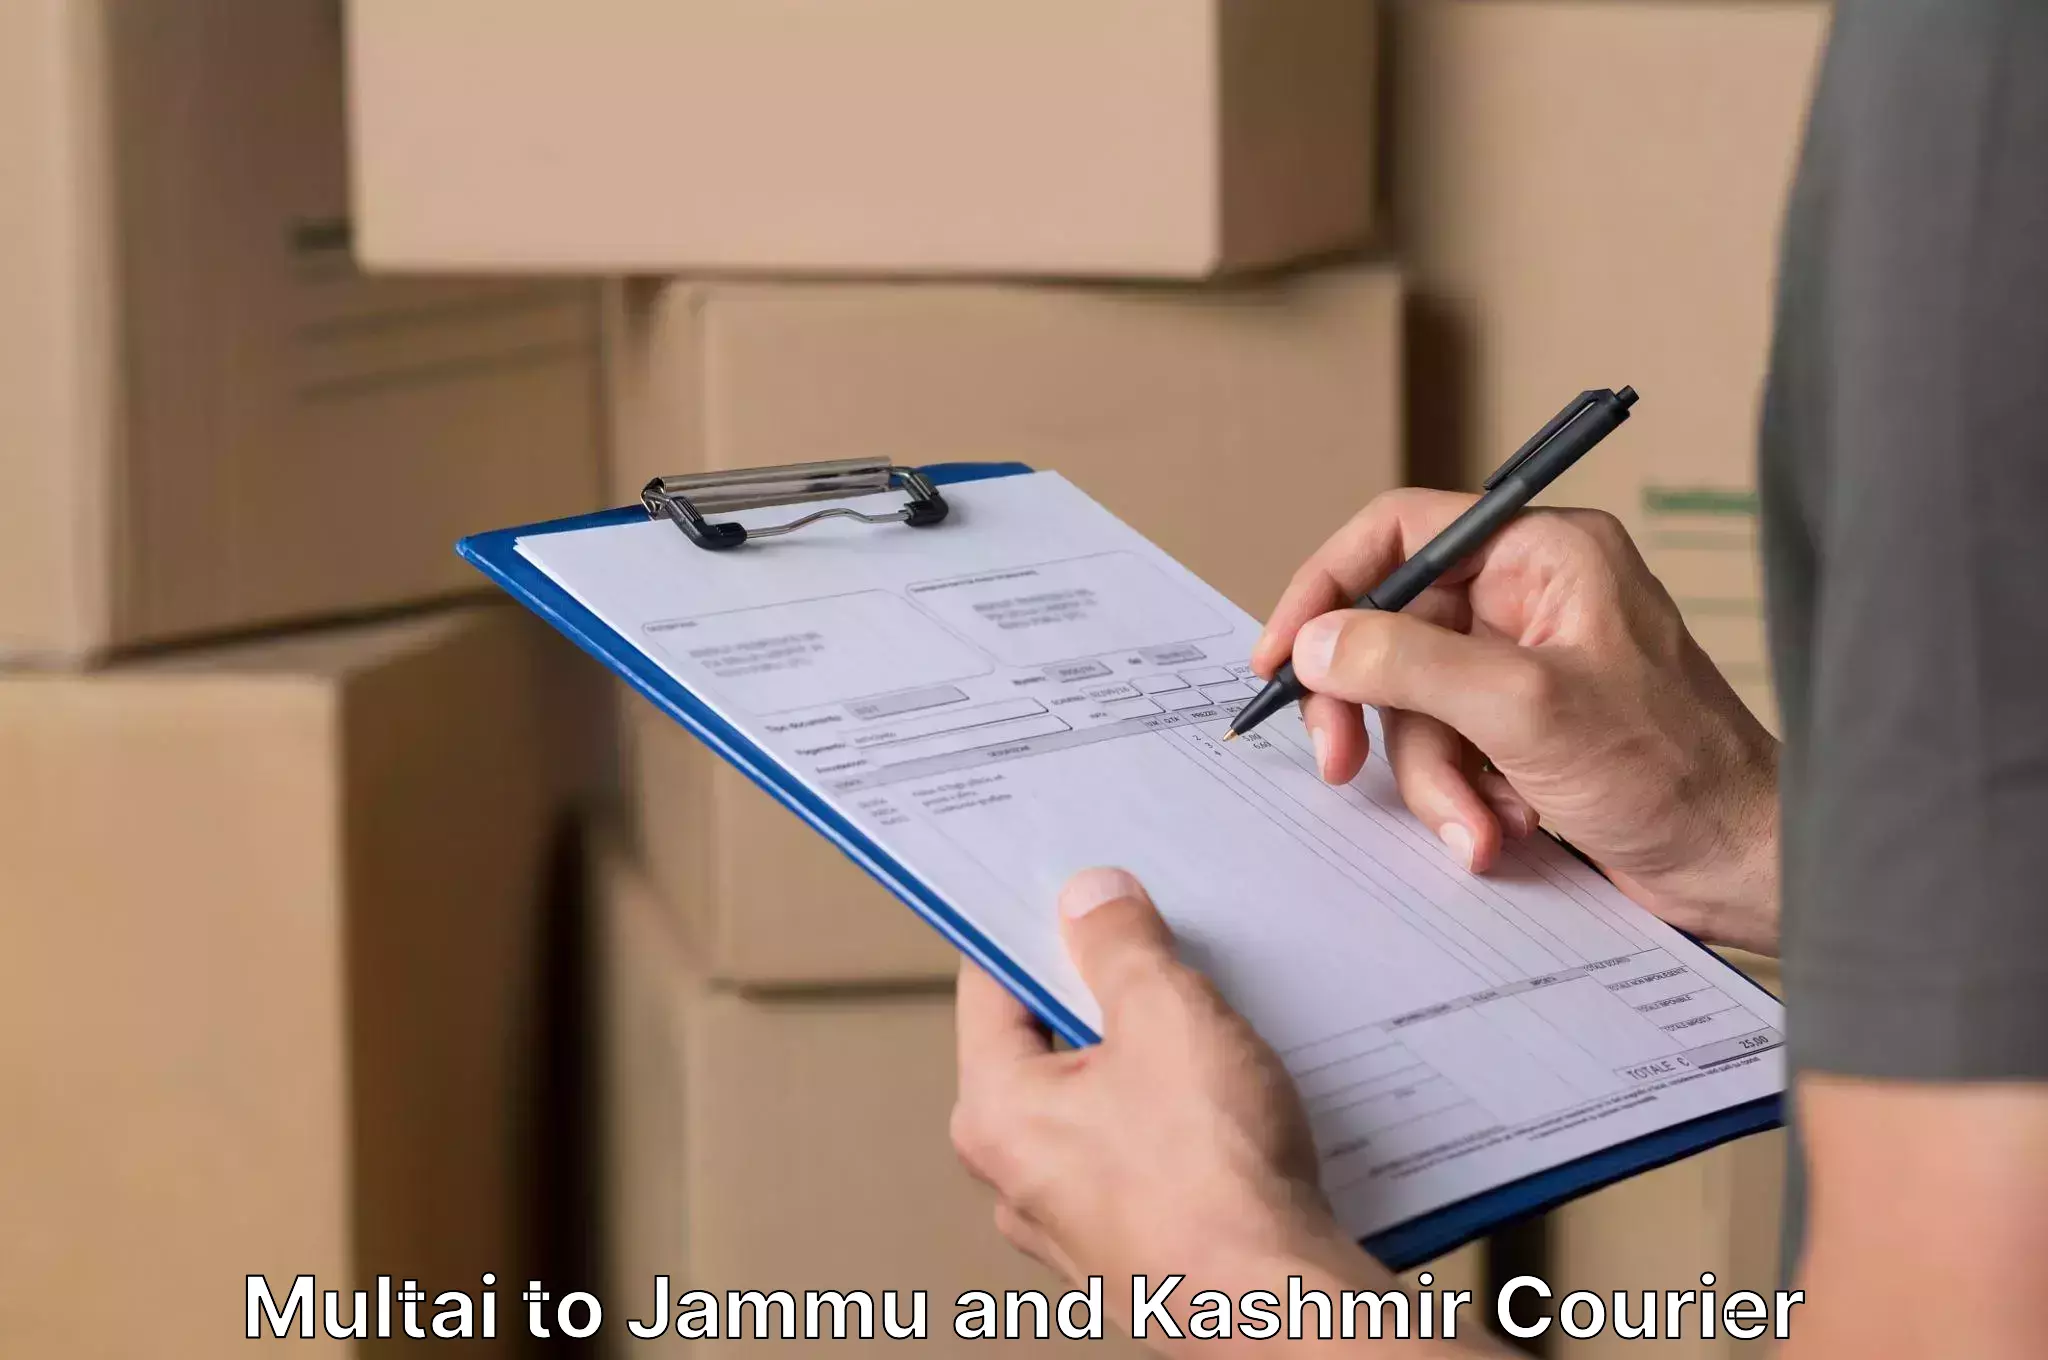 Quality relocation services in Multai to Jammu and Kashmir